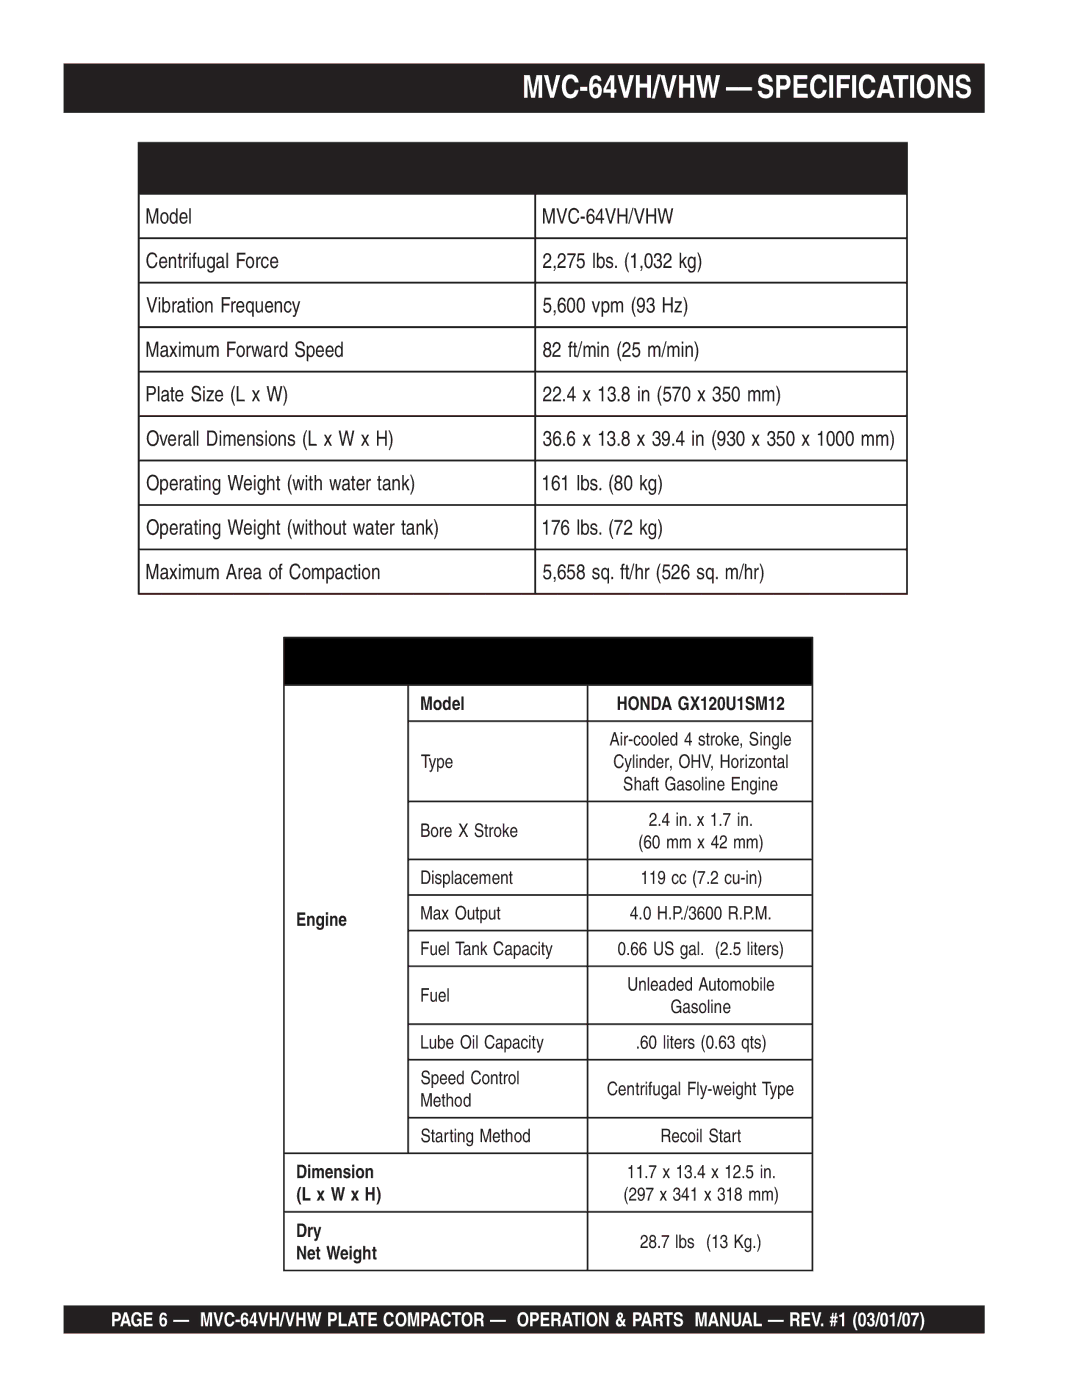 Multiquip GX12061 manual MVC-64VH/VHW Specifications 